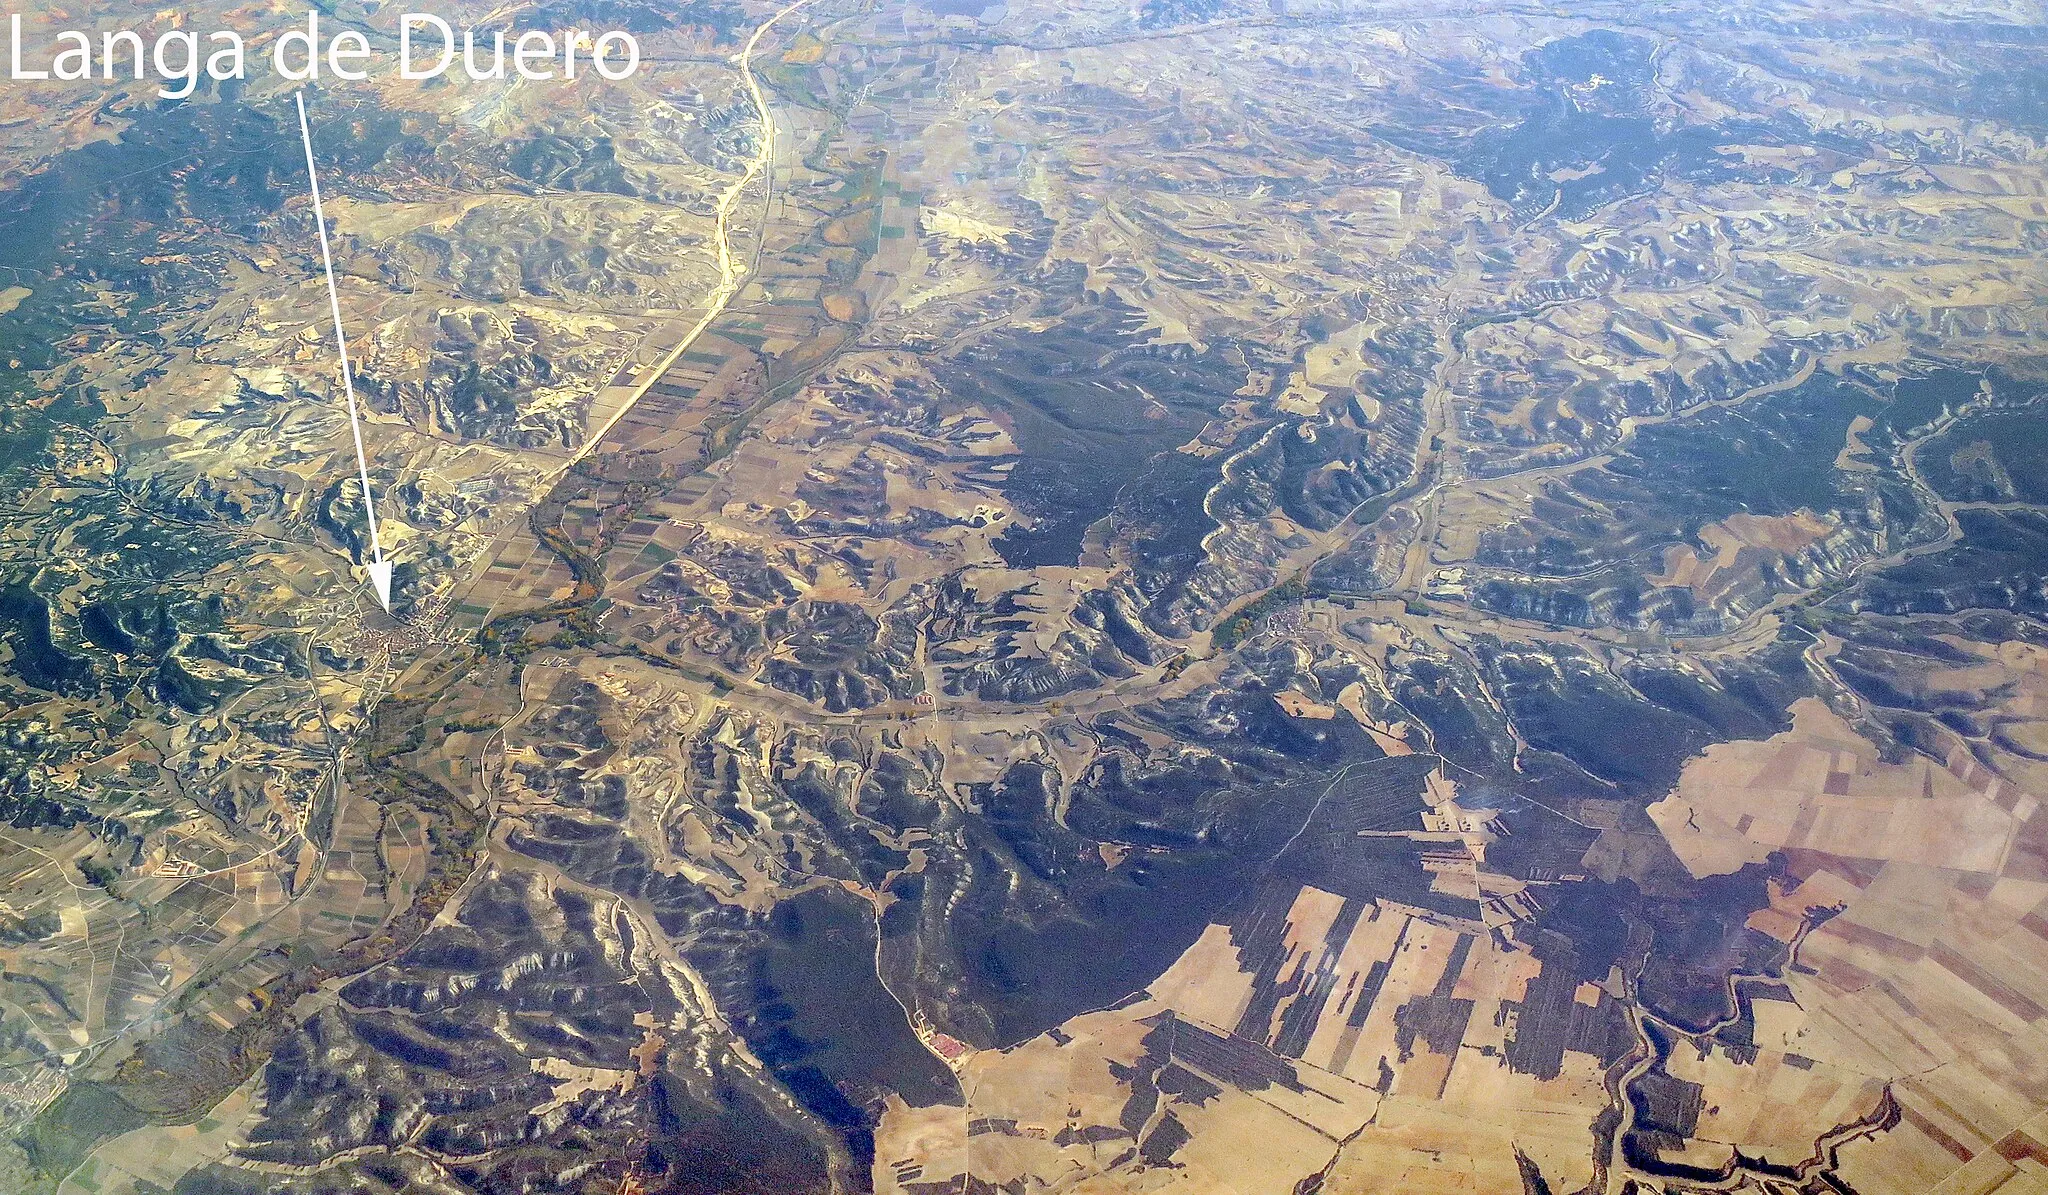 Photo showing: An aerial view of the part of the course of the Douro river (El Duero) through Soria in Spain, including the town of Langa de Duero.